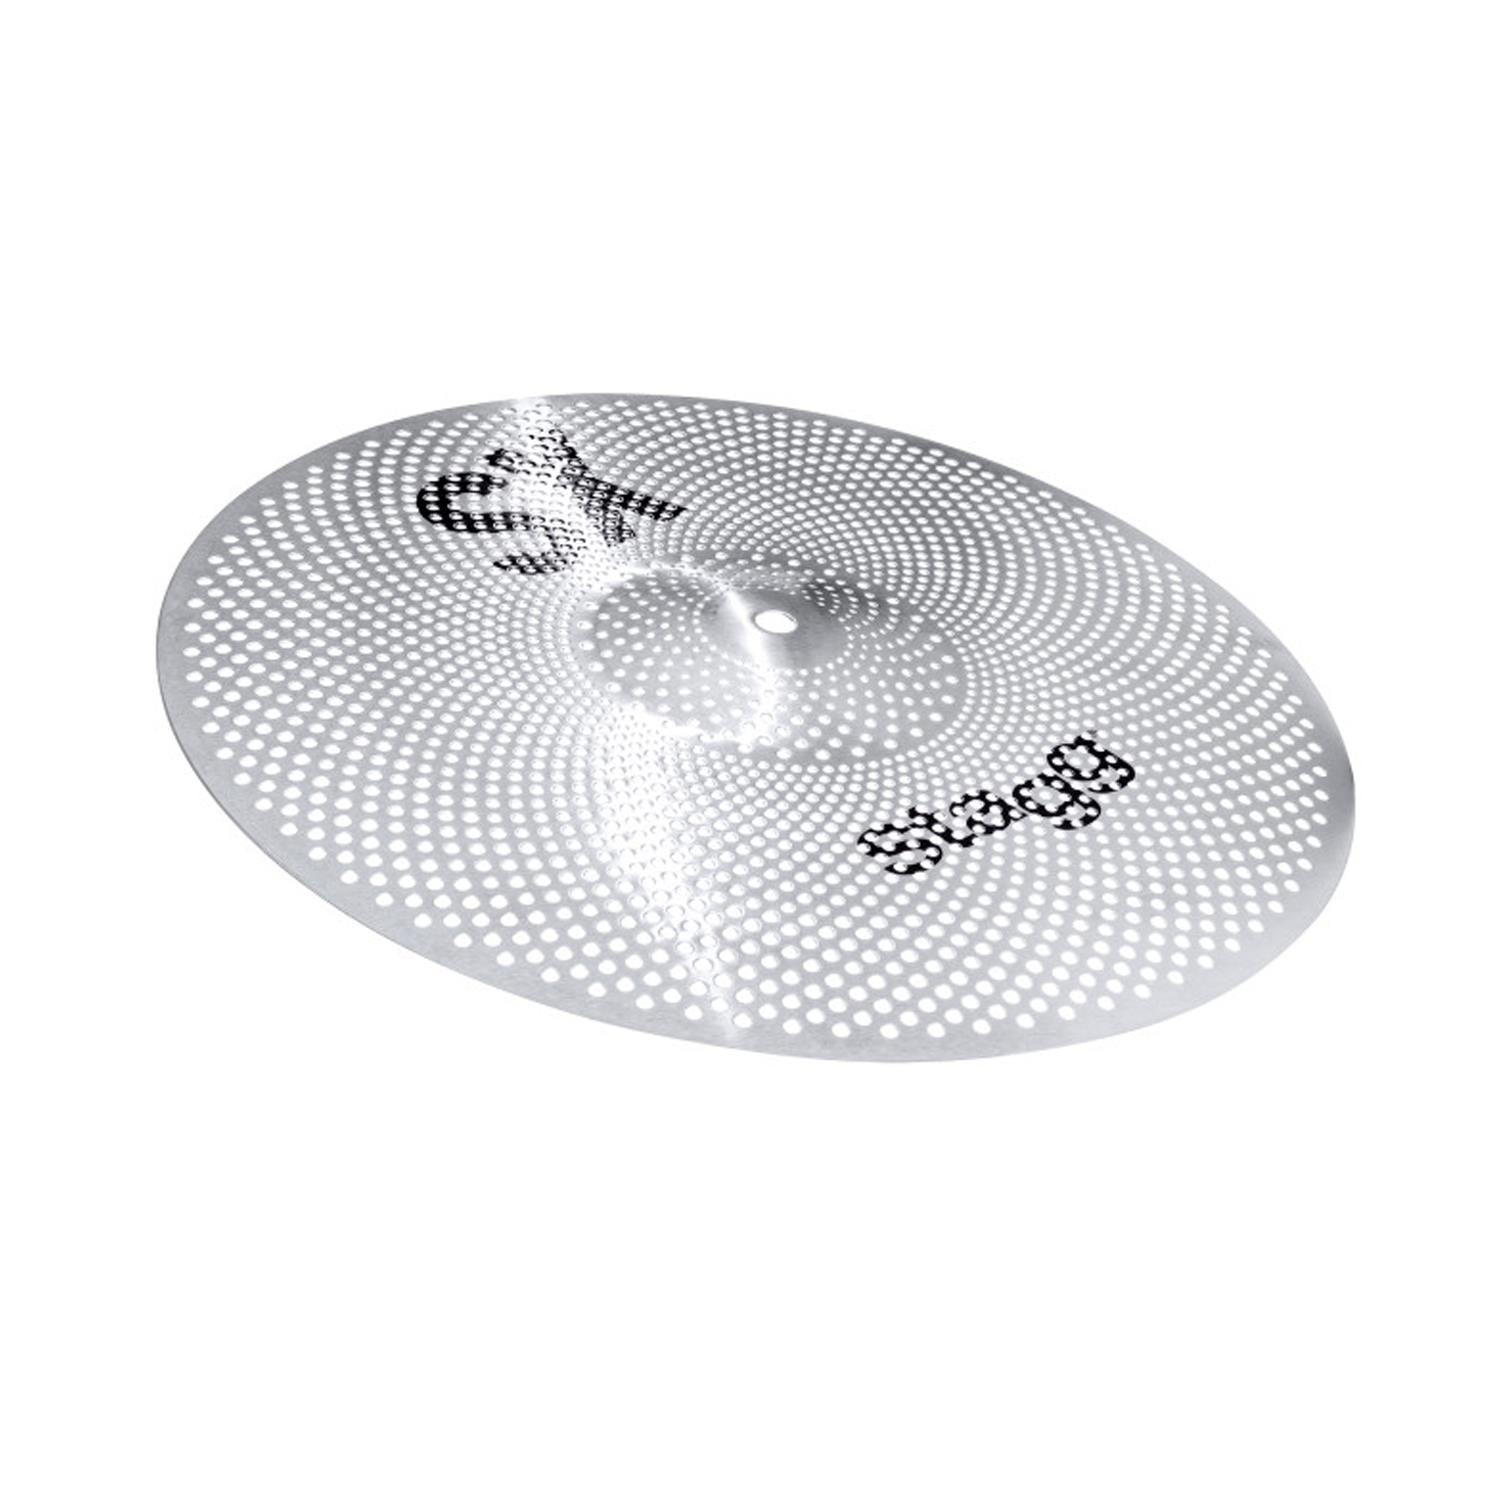 Stagg SXM-RM14 20" Low Volume Silent Practice Cymbal Ride - DY Pro Audio